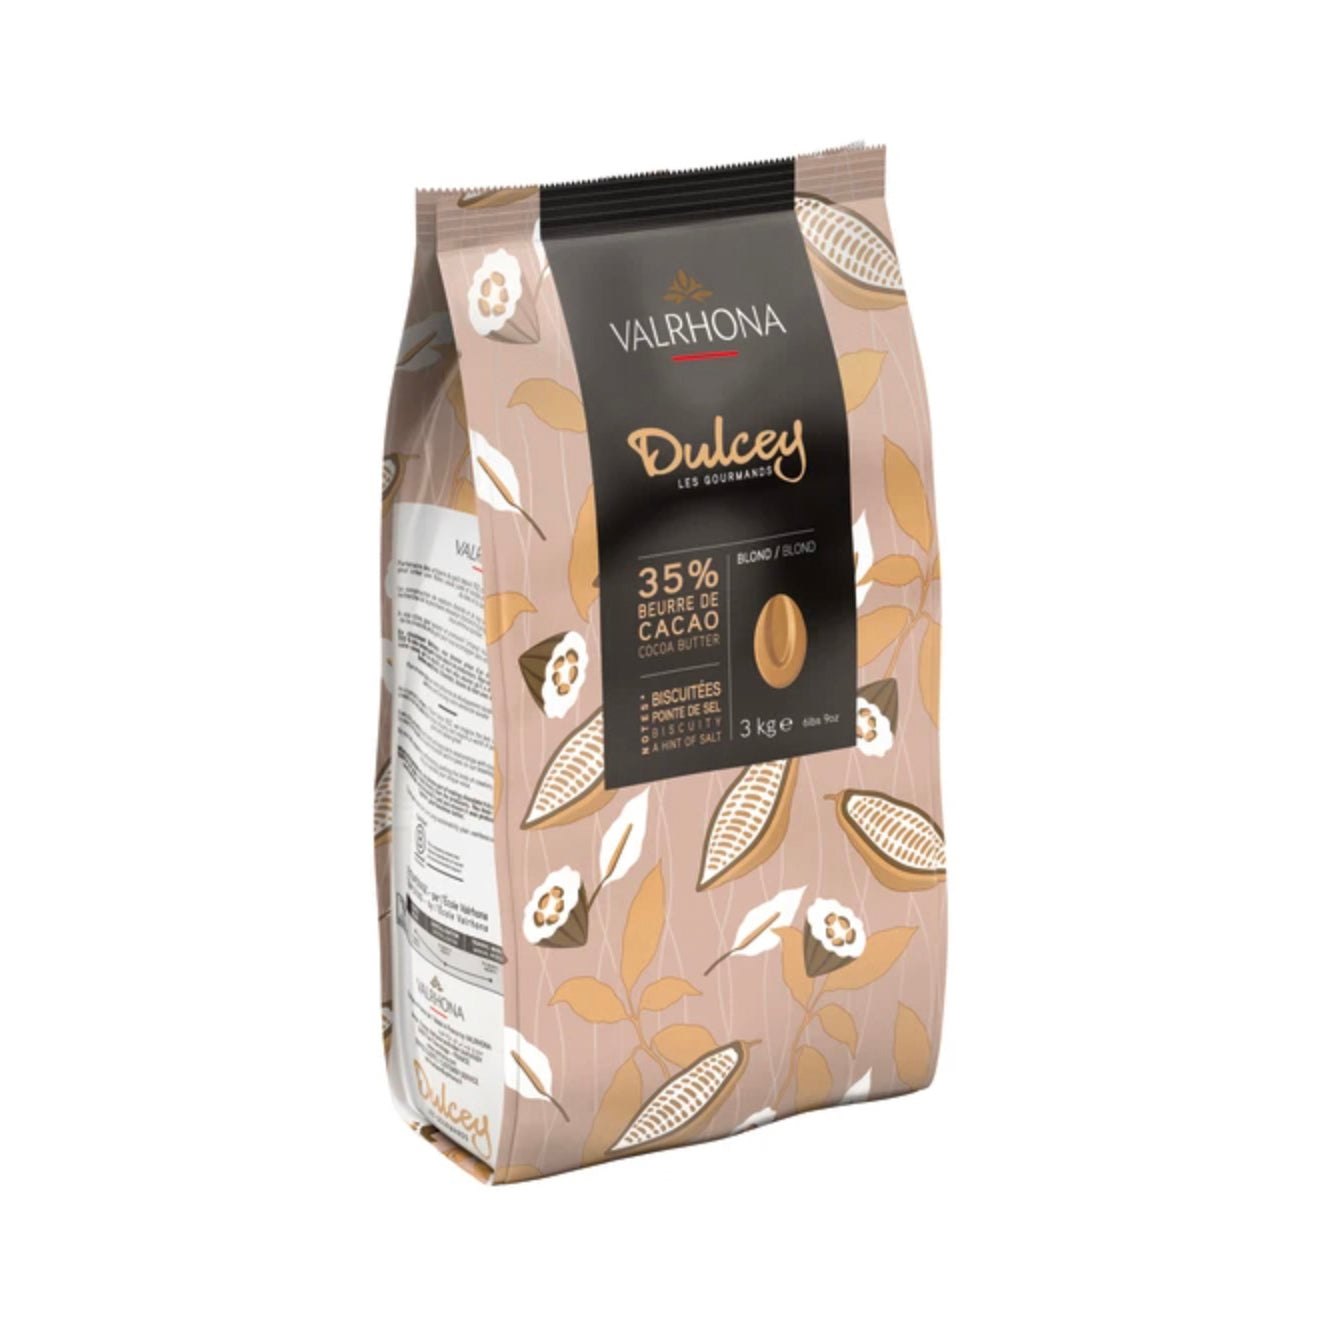 VALRHONA Dulcey 35%, Blond Chocolate Couverture